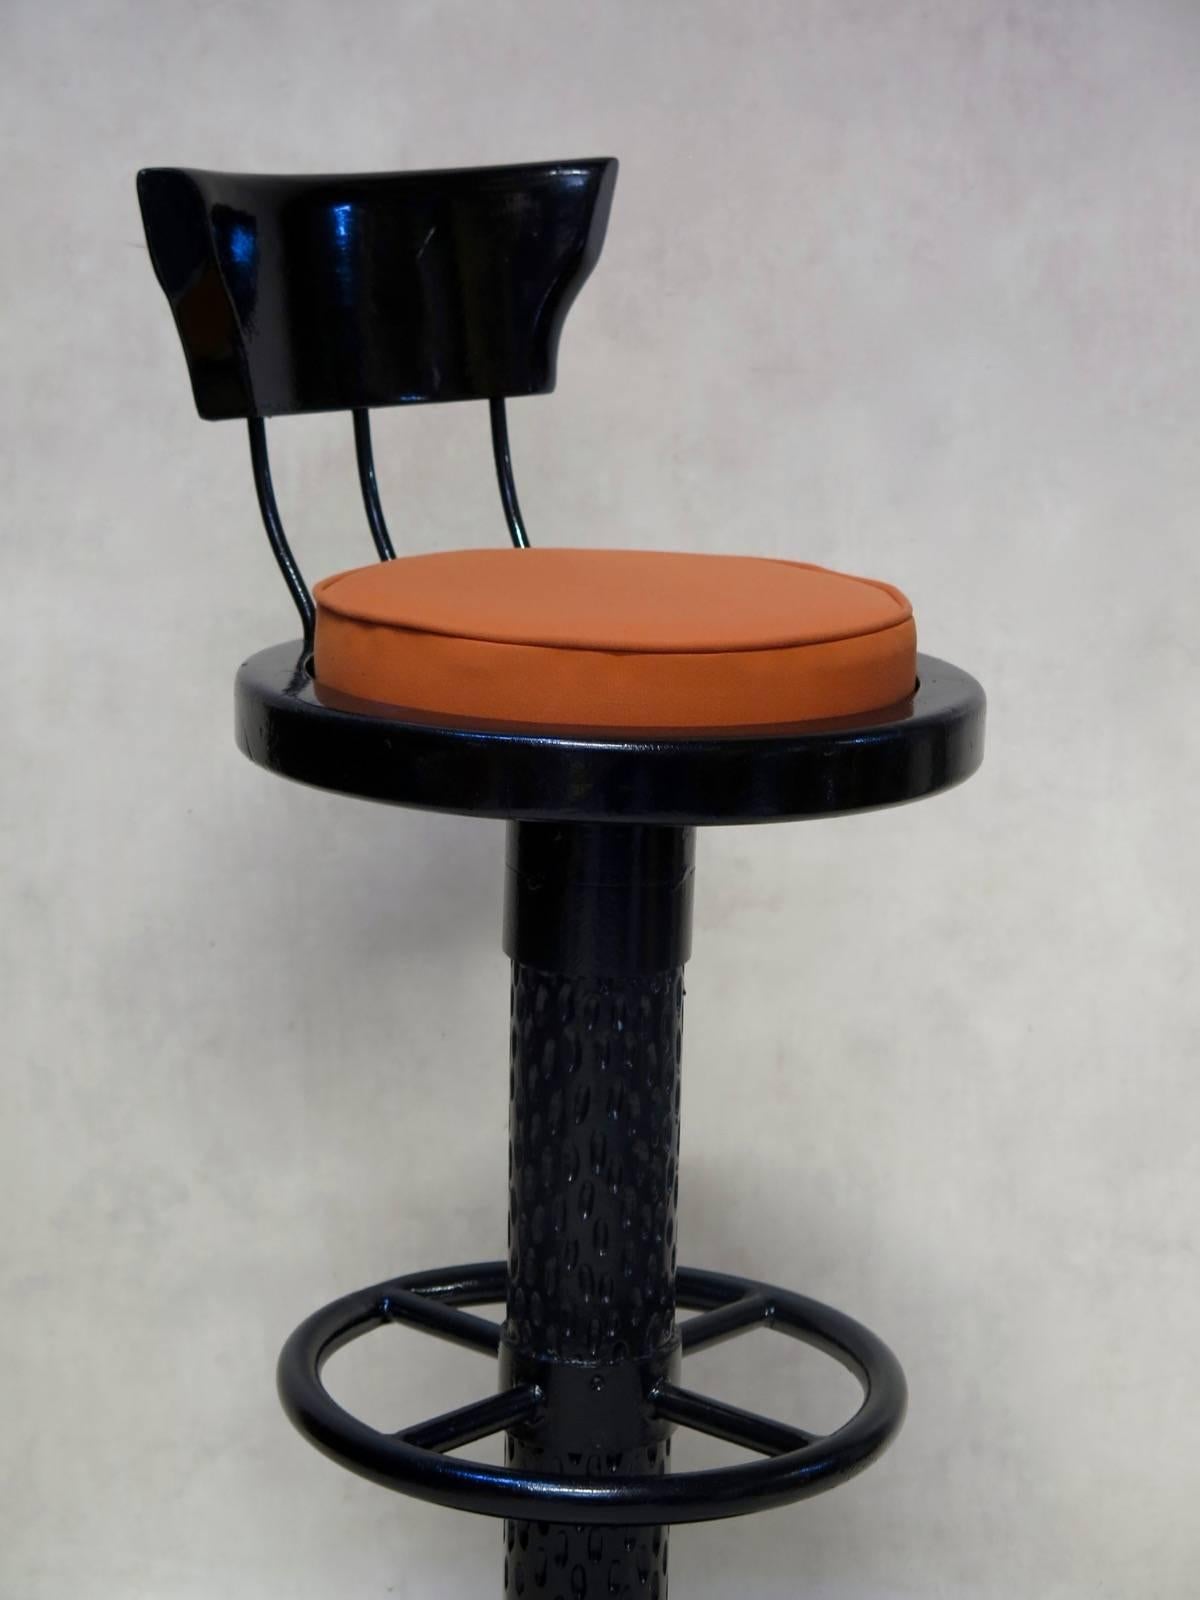 Set of eight stools with swiveling seats, and low back supports. Raised on wide, round iron bases. The stems are decorated with a gouged effect. Glossy black finish.